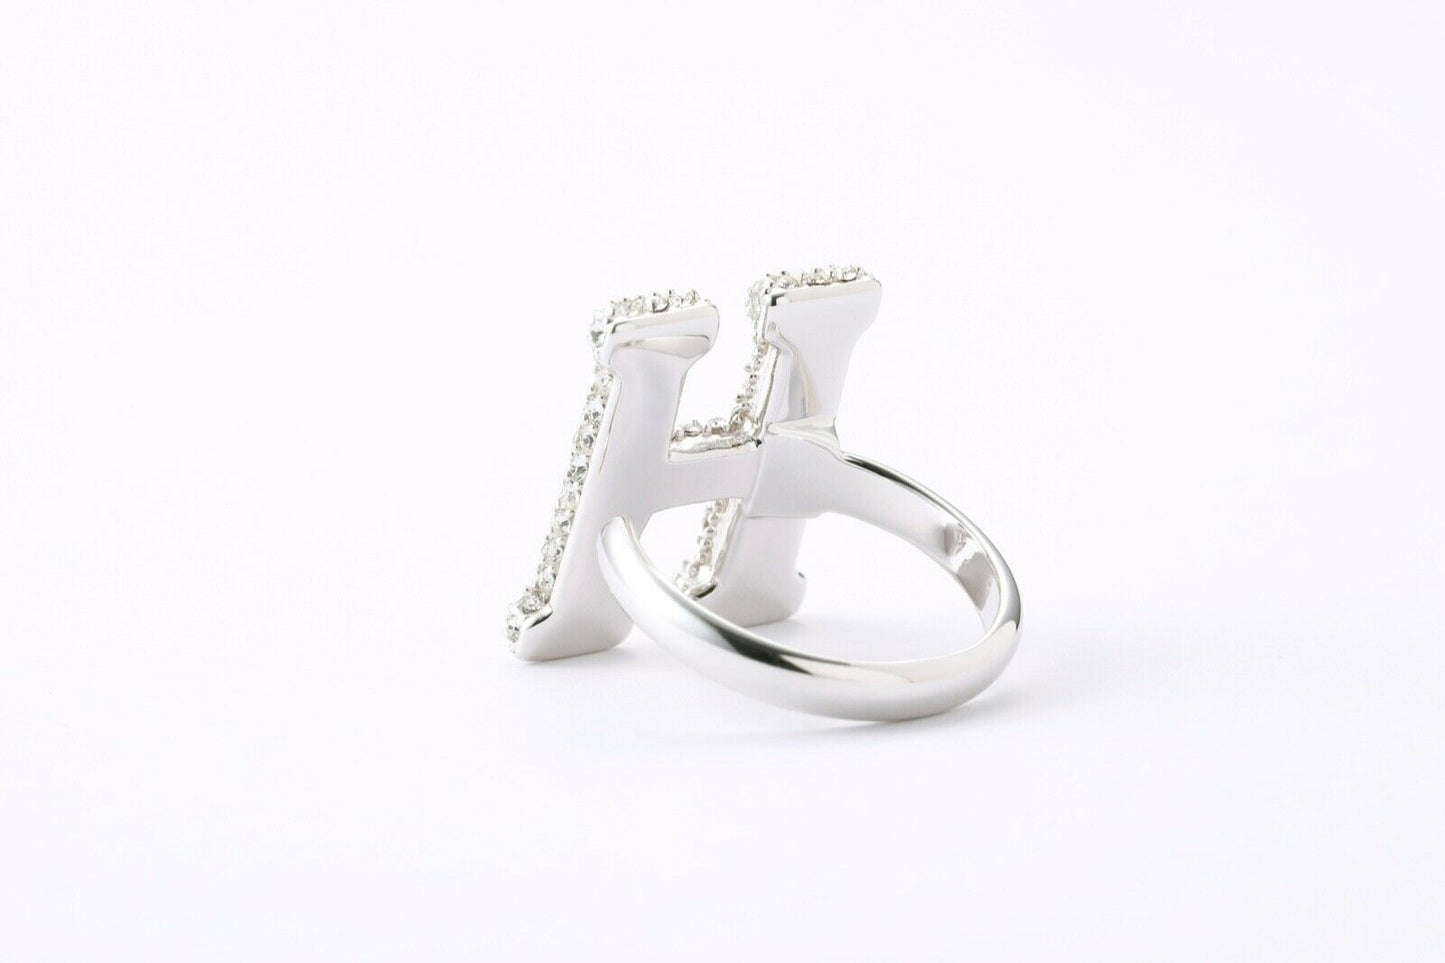 Alphabet Ring Initial H Swarovski Crystals Free Size Sterling Silver 925 Rhodium Plated